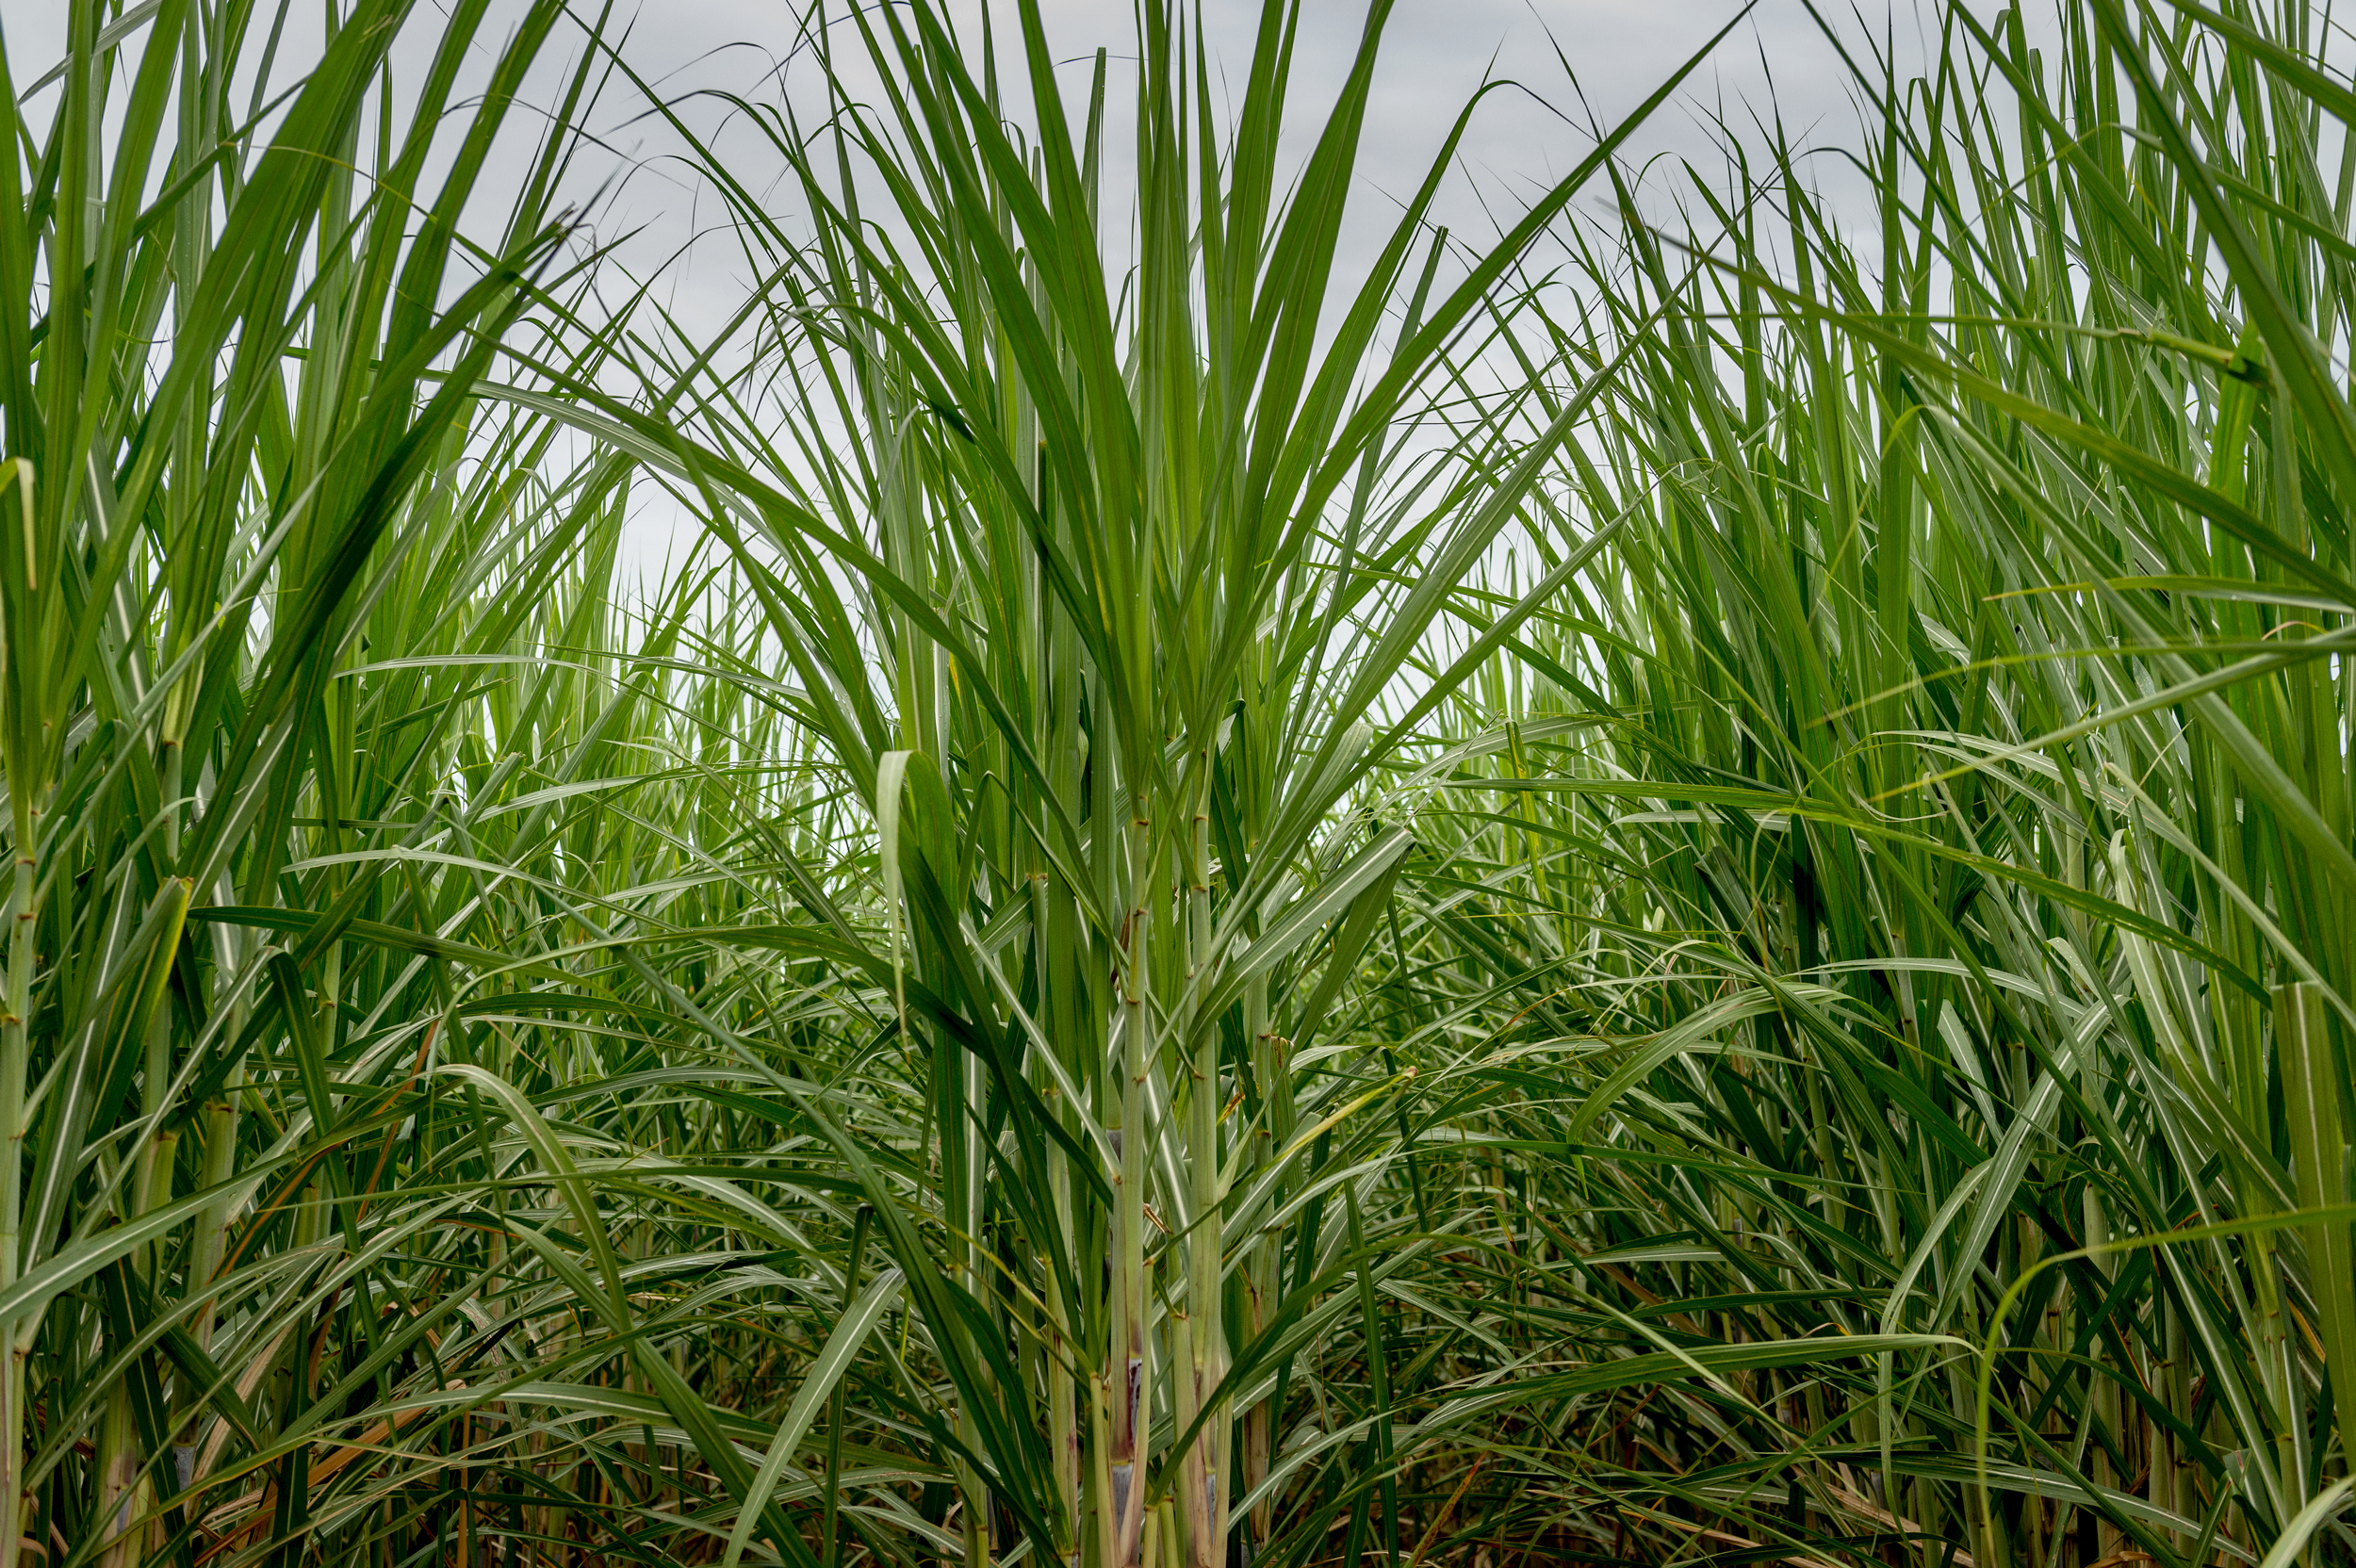 Sugar which comes from processing sugar beet or cane is one of COFCO International’s most traded commodities. Its key origination markets are the world’s main sugar exporters - Brazil, Central America, India, Thailand, EU and Ukraine. Hélène sells sugar to the Black Sea region, Israel, Lebanon and Africa.